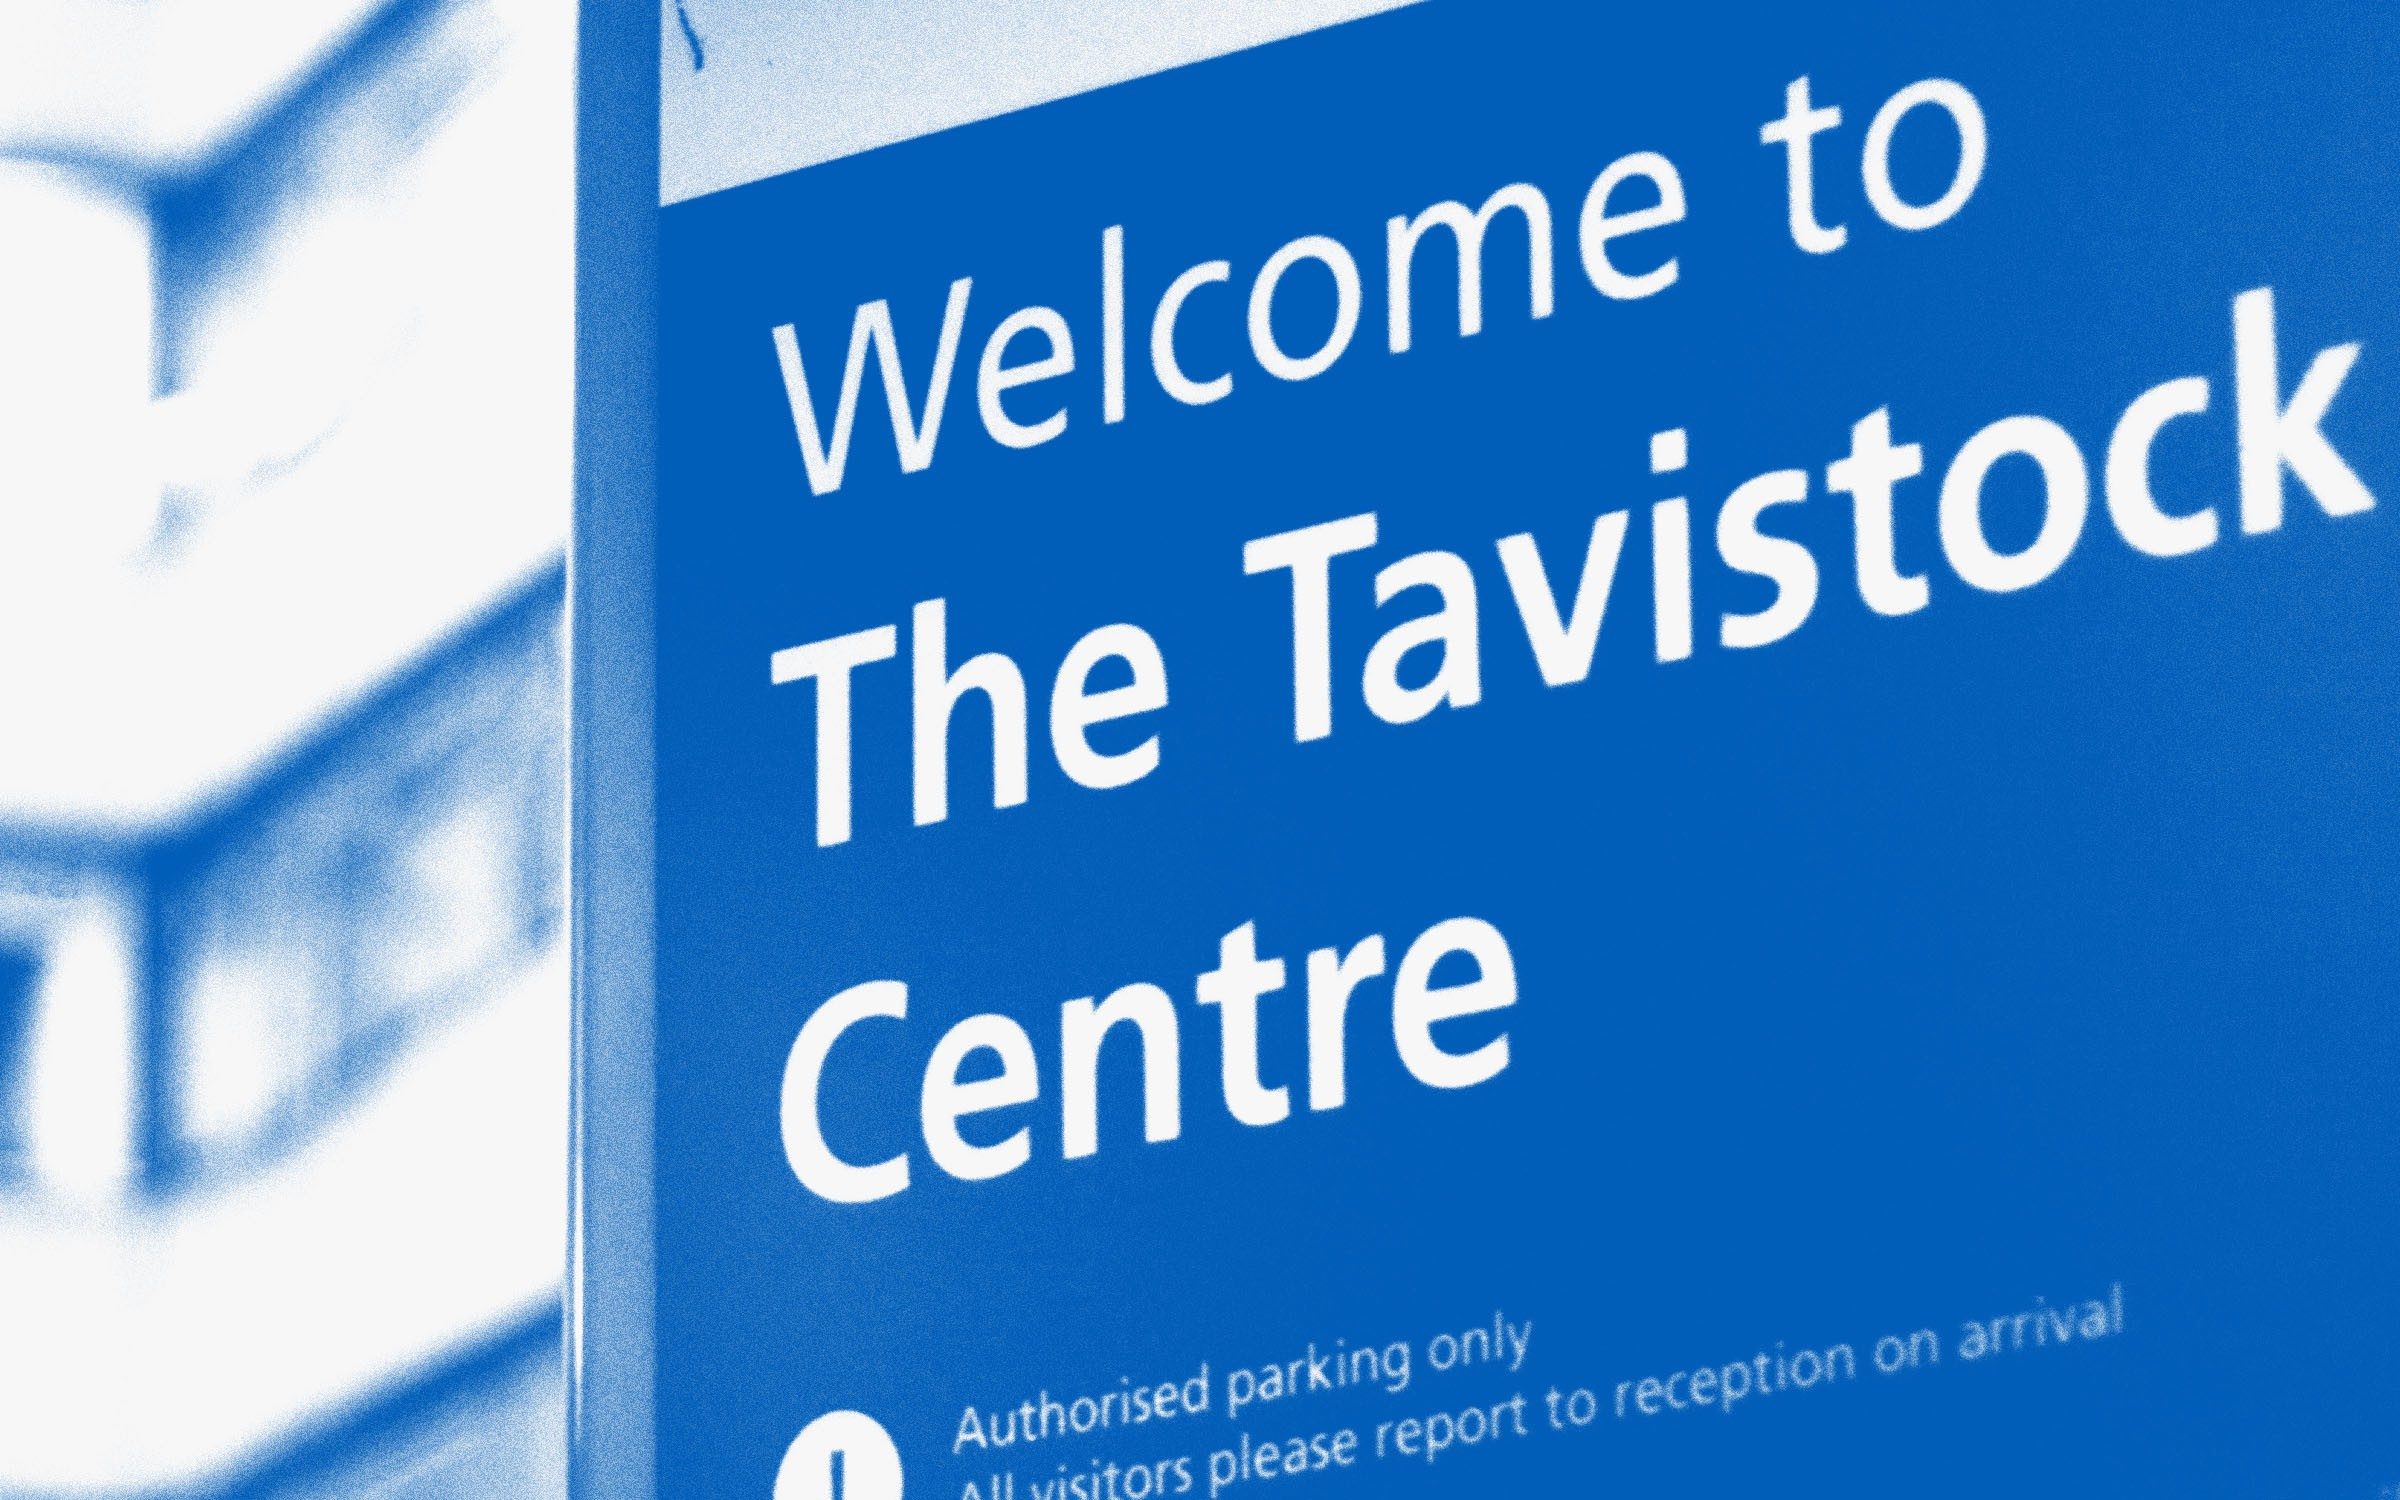 how the void left by the tavistock is being filled by the private sector